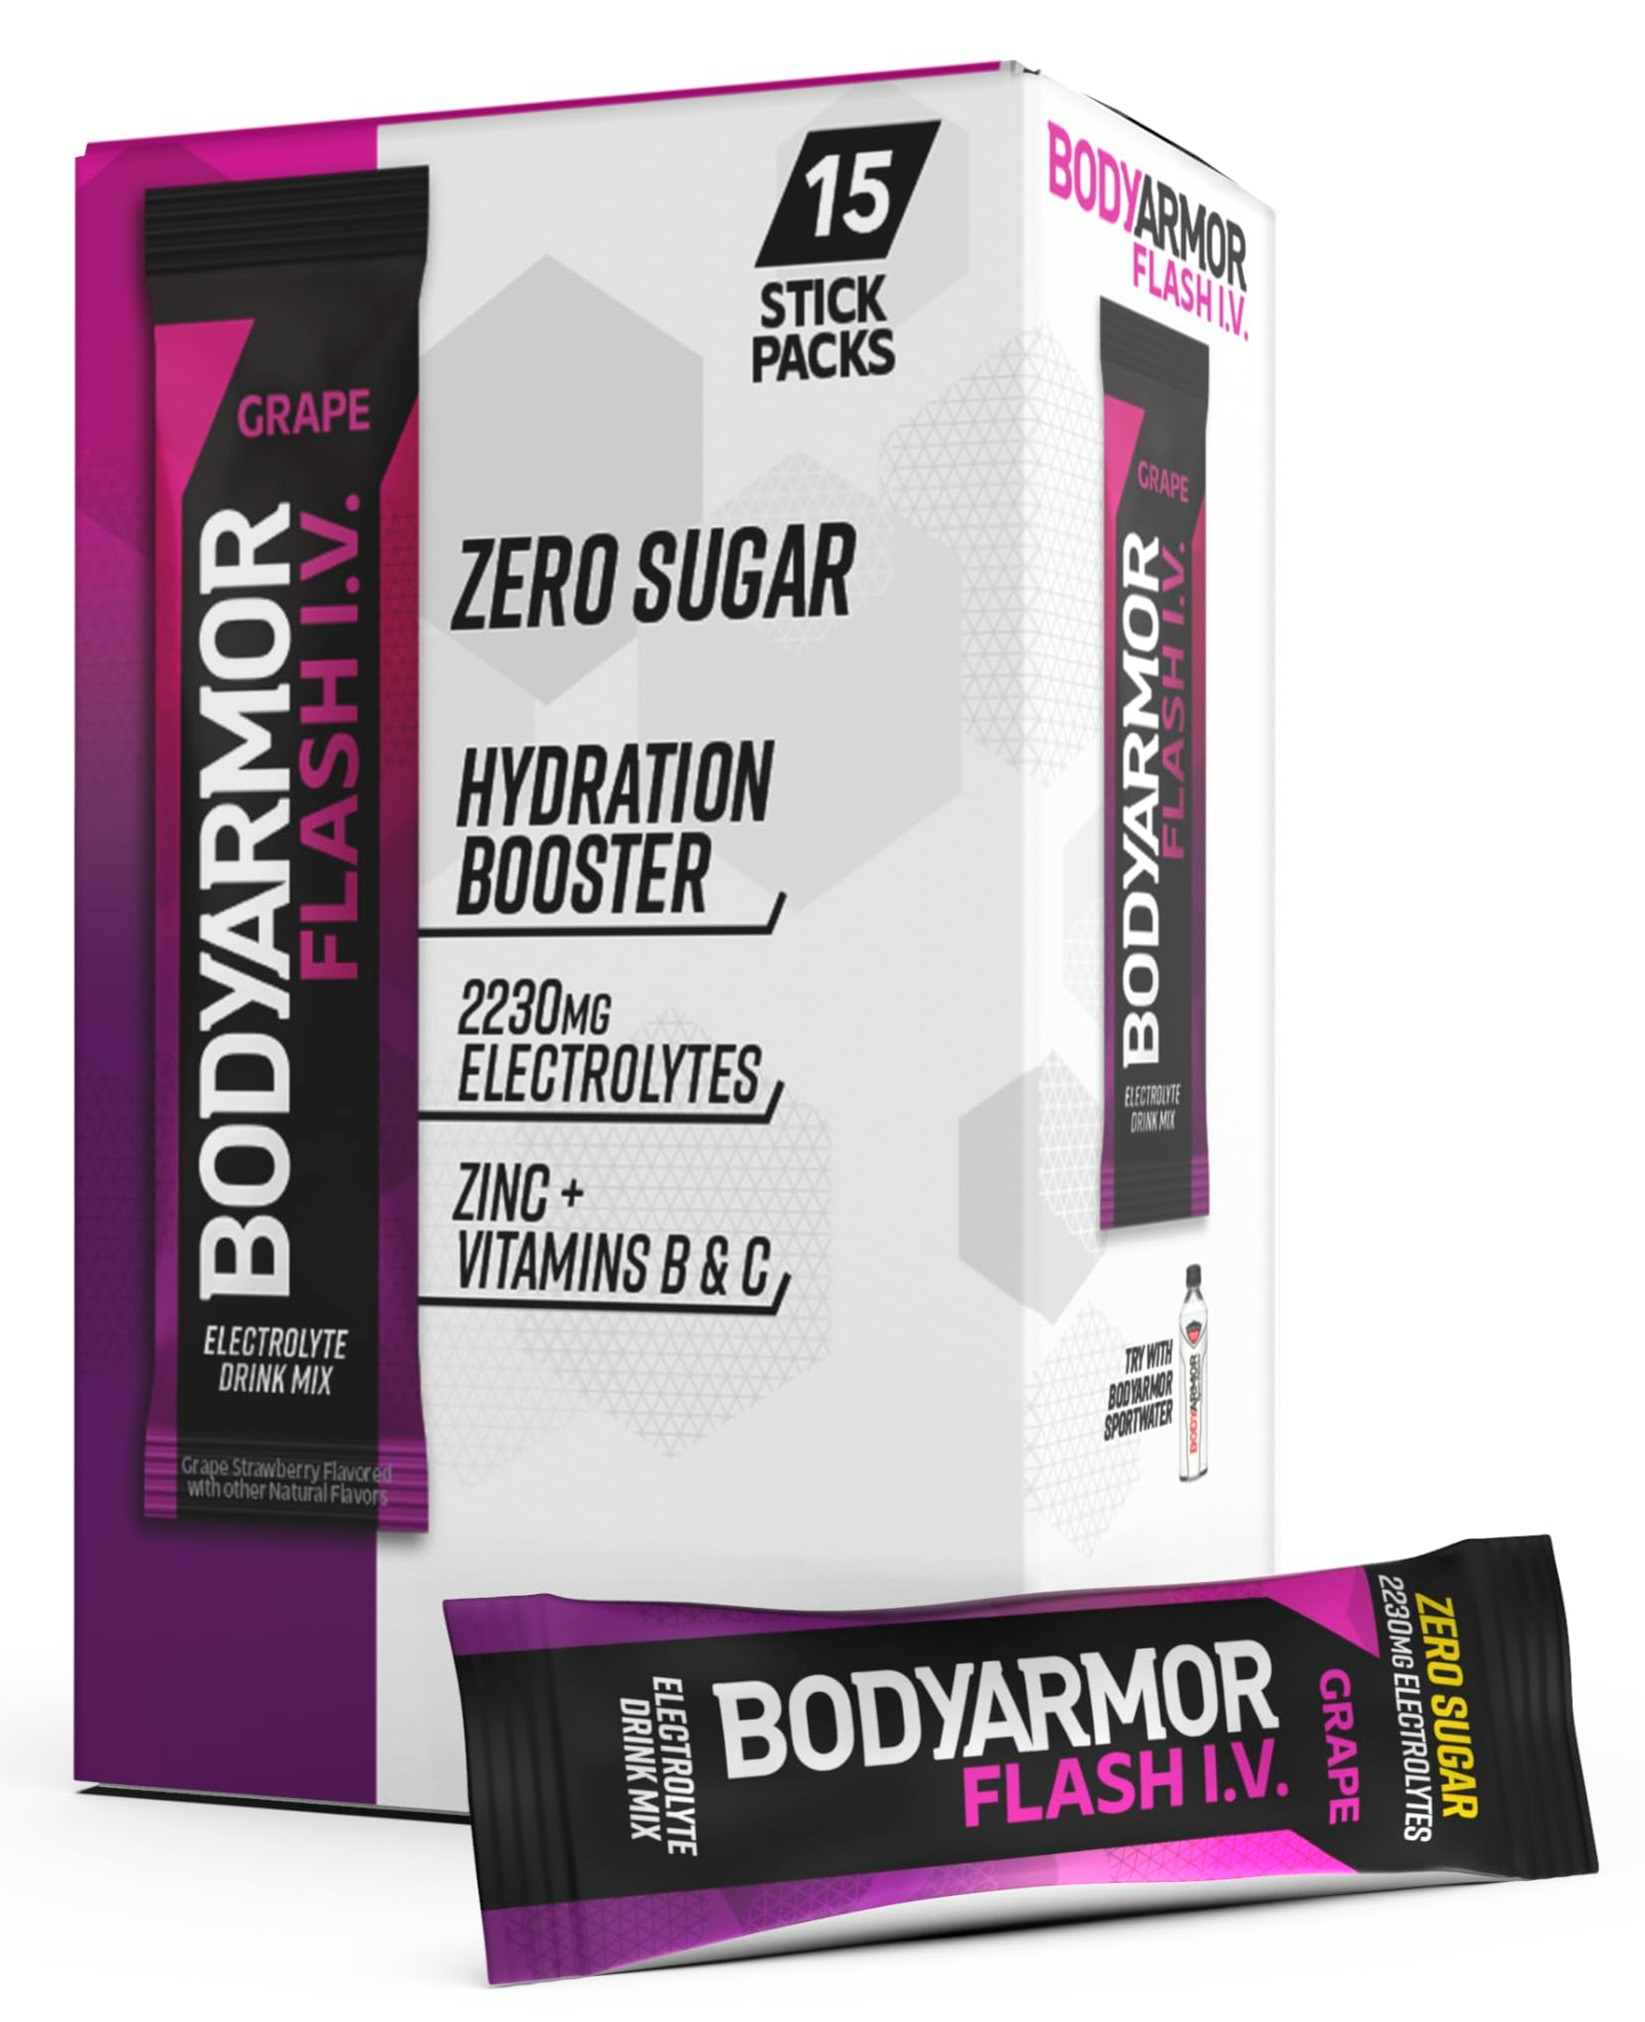 $6.77 w/ S&S: BODYARMOR Flash IV Electrolyte Packets, Grape (15 Count)